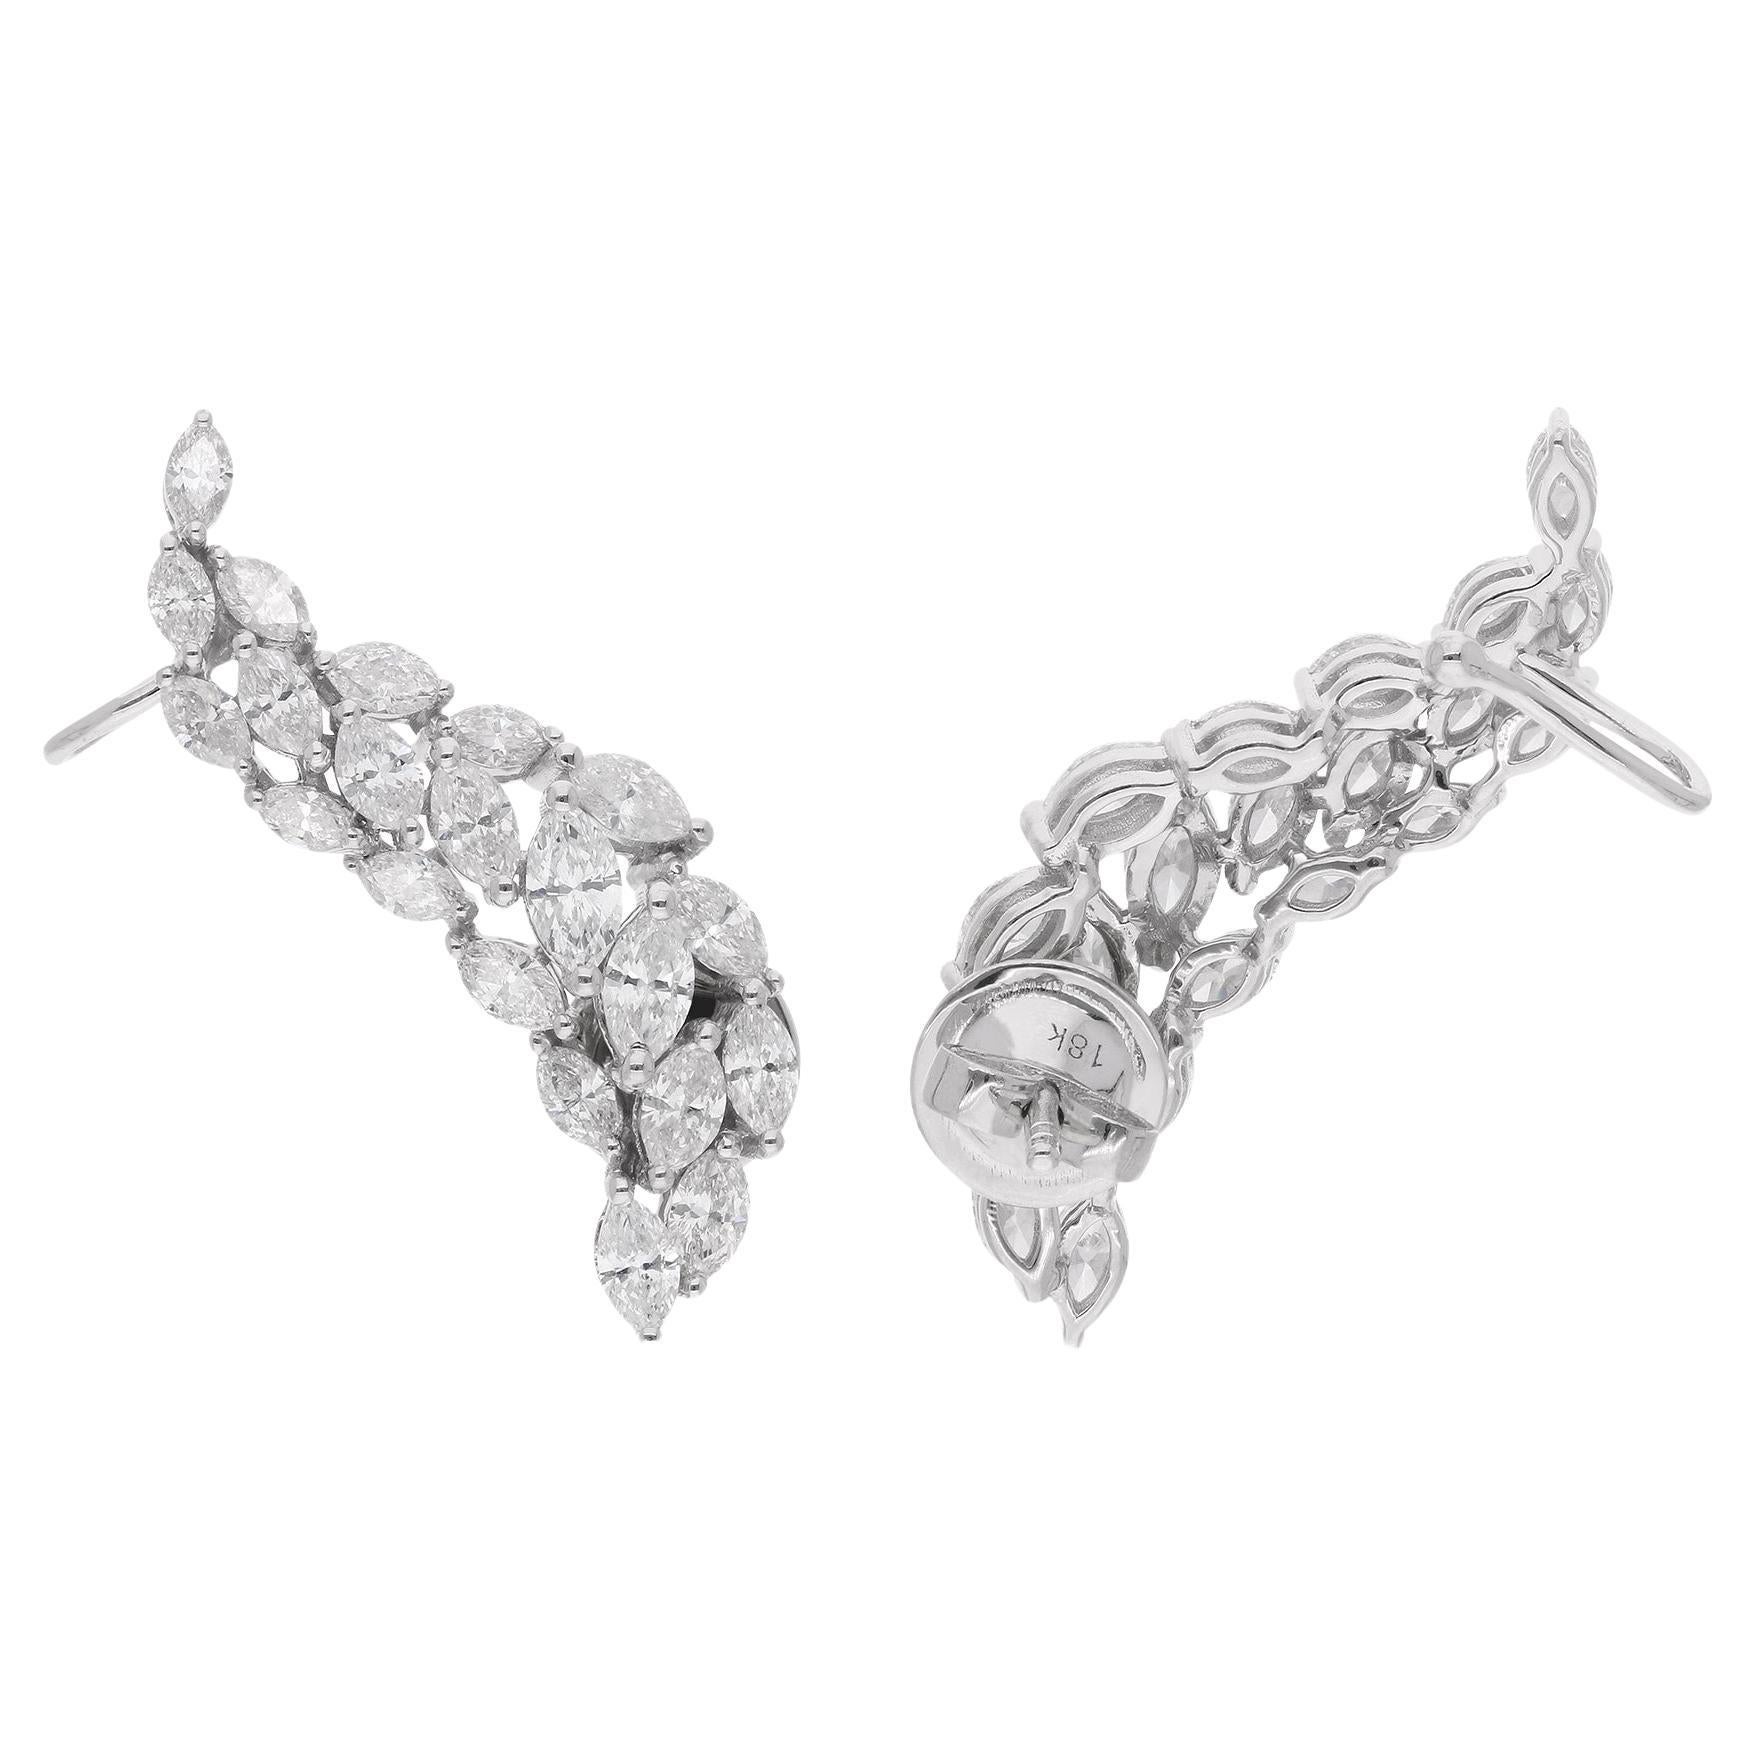 Real 2.91 Carat Marquise Diamond Ear Cuff Earrings 14 Karat White Gold Jewelry For Sale